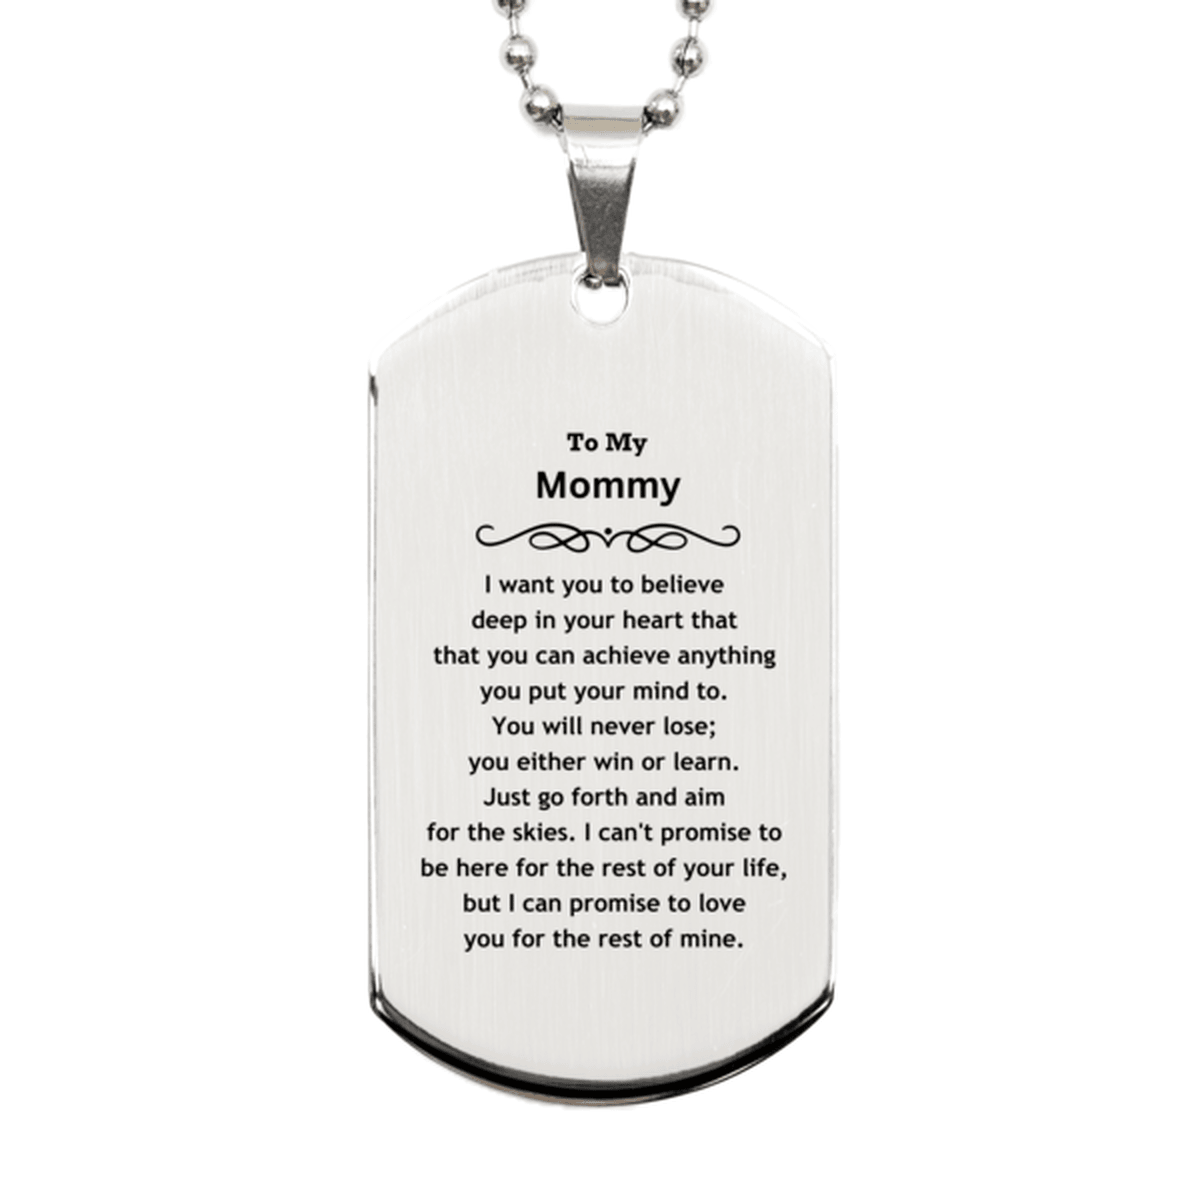 Motivational Mommy Silver Dog Tag Engraved Necklace, I can promise to love you for the rest of my life, Birthday Christmas Jewelry Gift - Mallard Moon Gift Shop